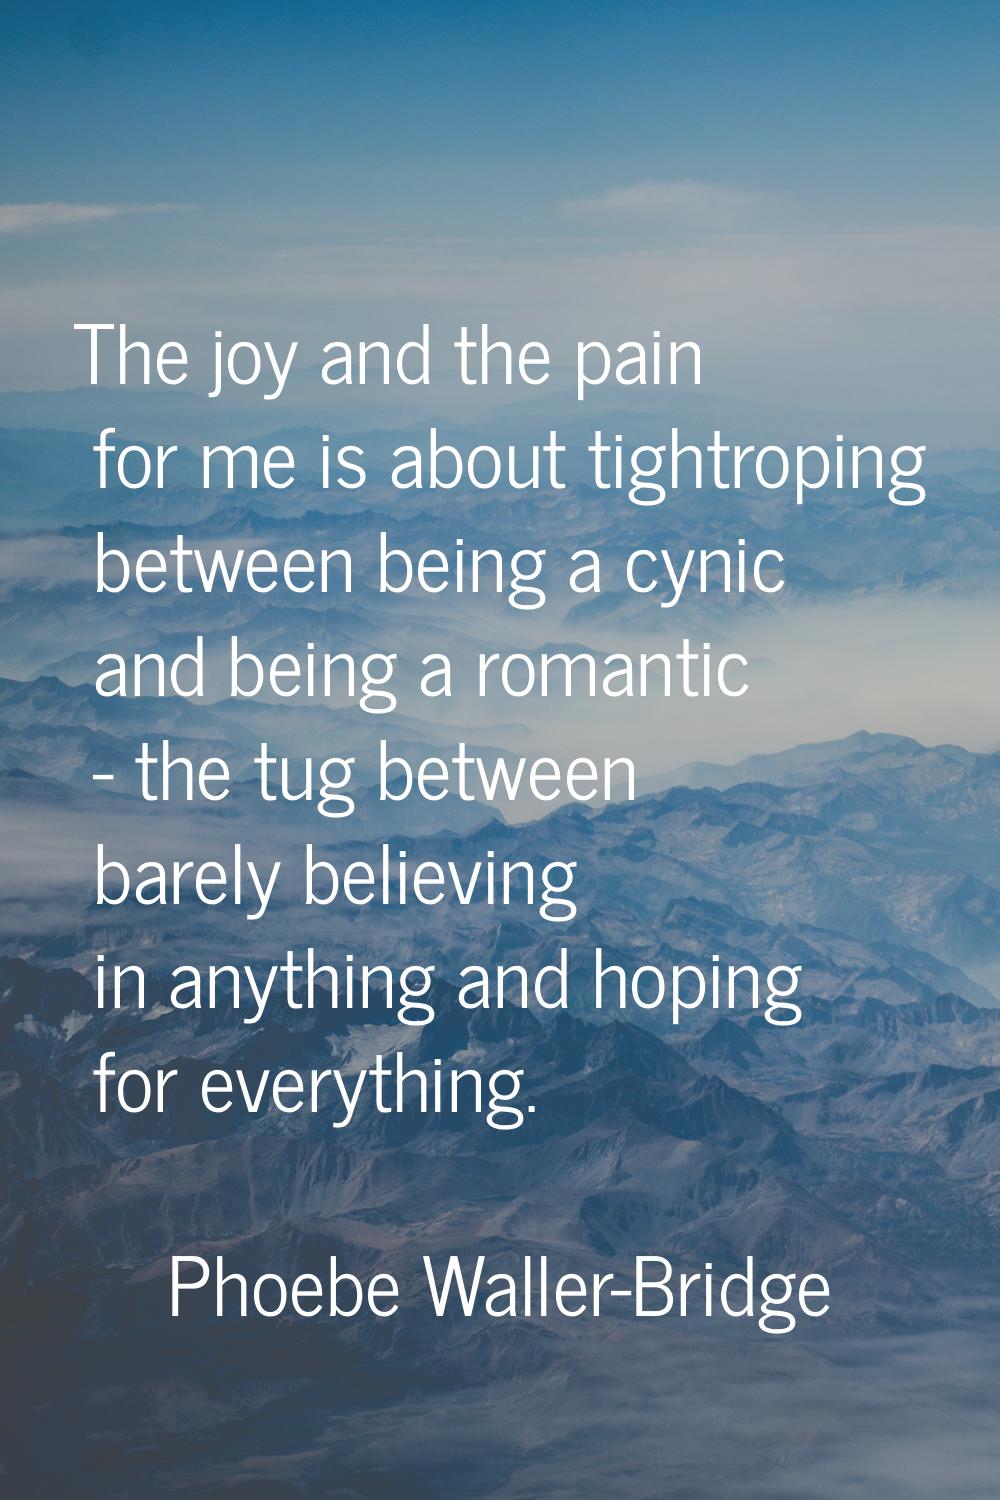 The joy and the pain for me is about tightroping between being a cynic and being a romantic - the t